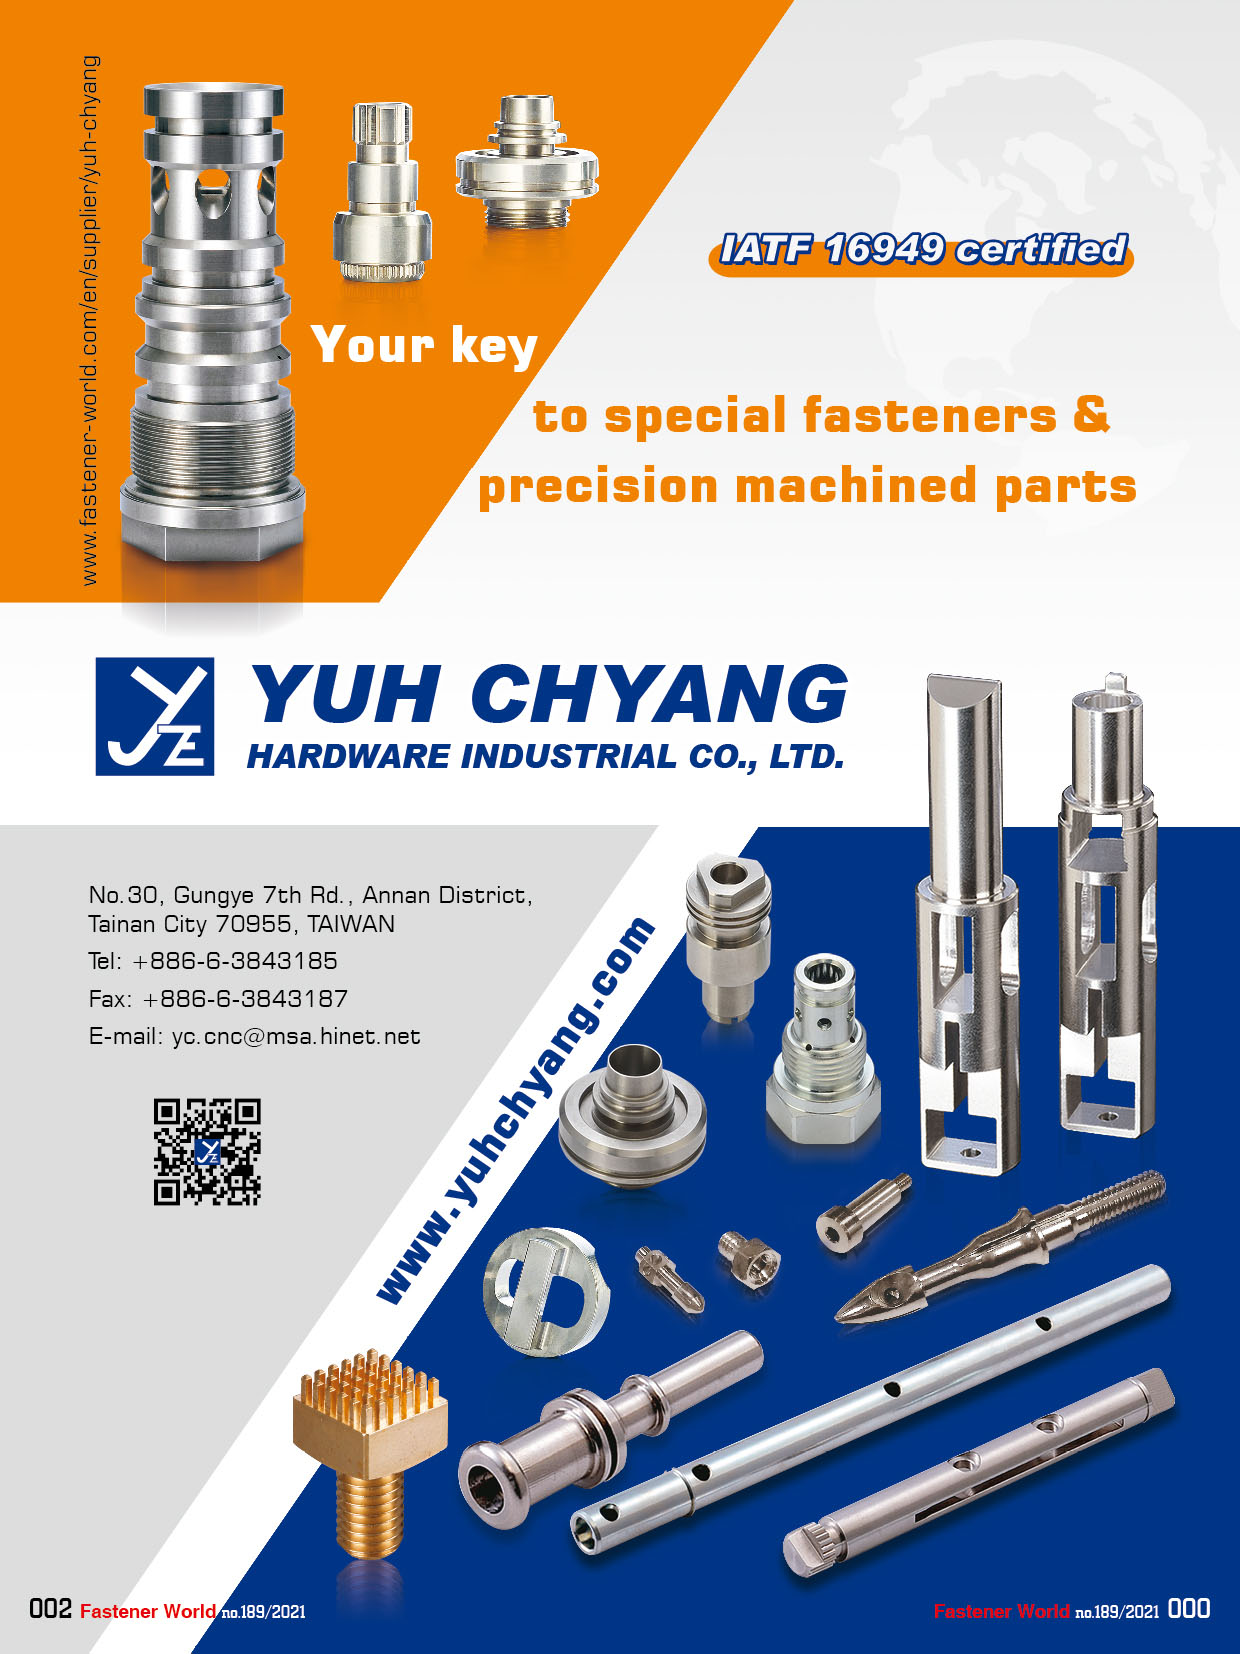 YUH CHYANG HARDWARE INDUSTRIAL CO., LTD.  , Manufacturer of Special Fasteners & Precision Machined Parts , Cnc Machining Parts